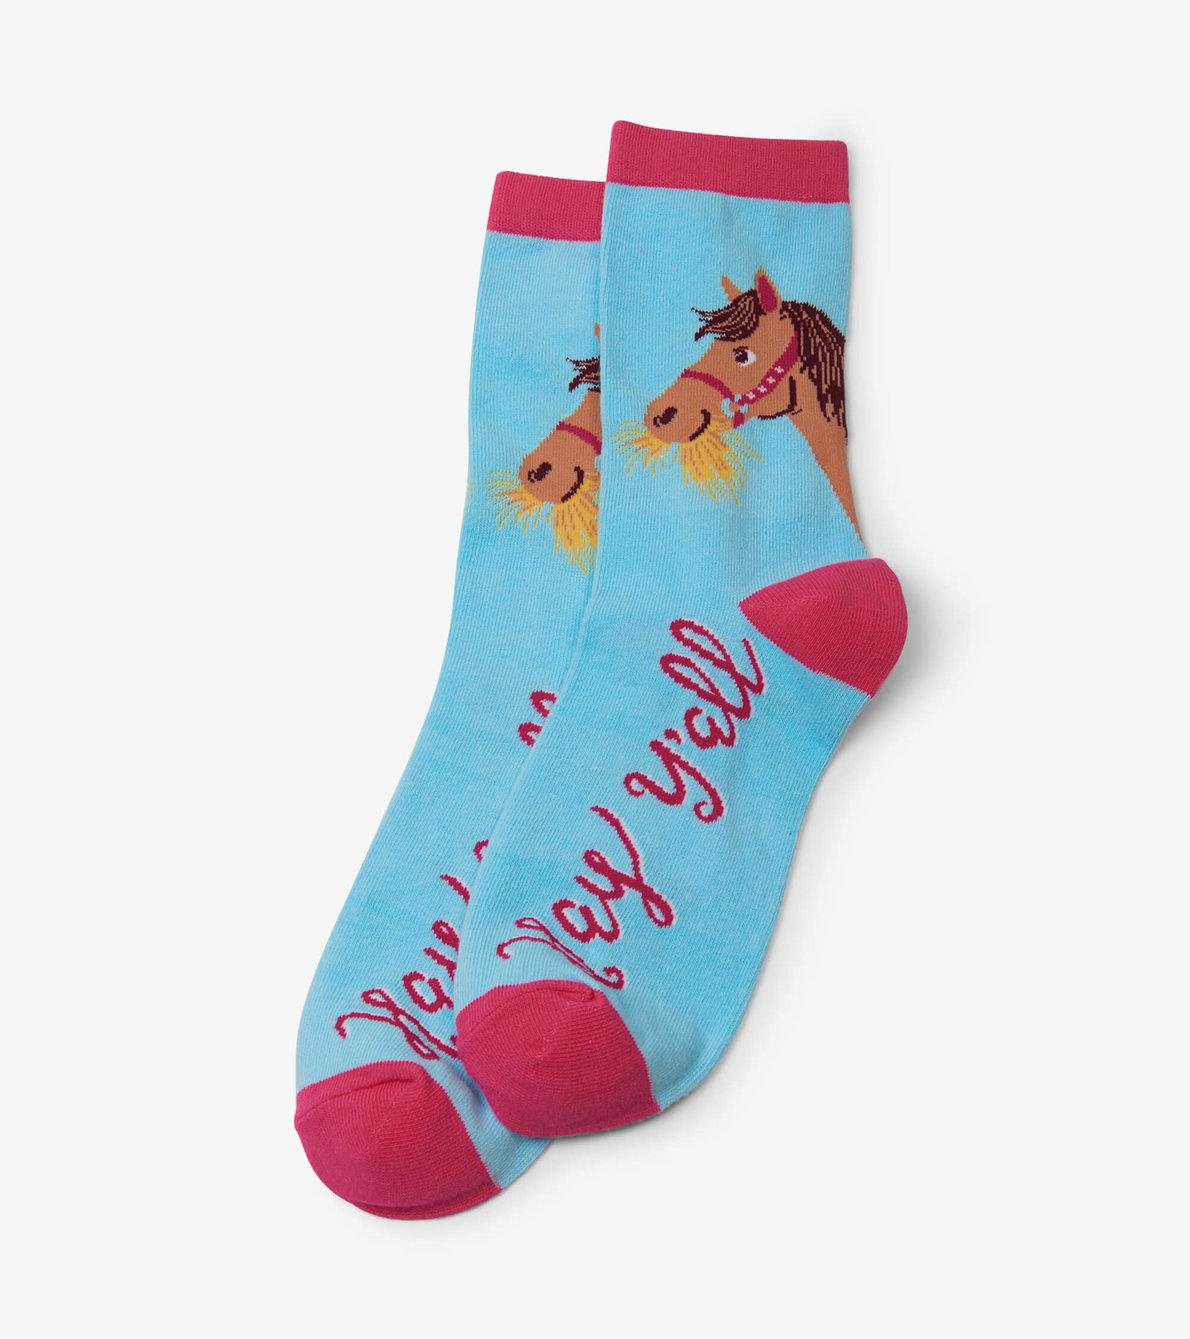 View larger image of Hay Y'all Women's Crew Socks